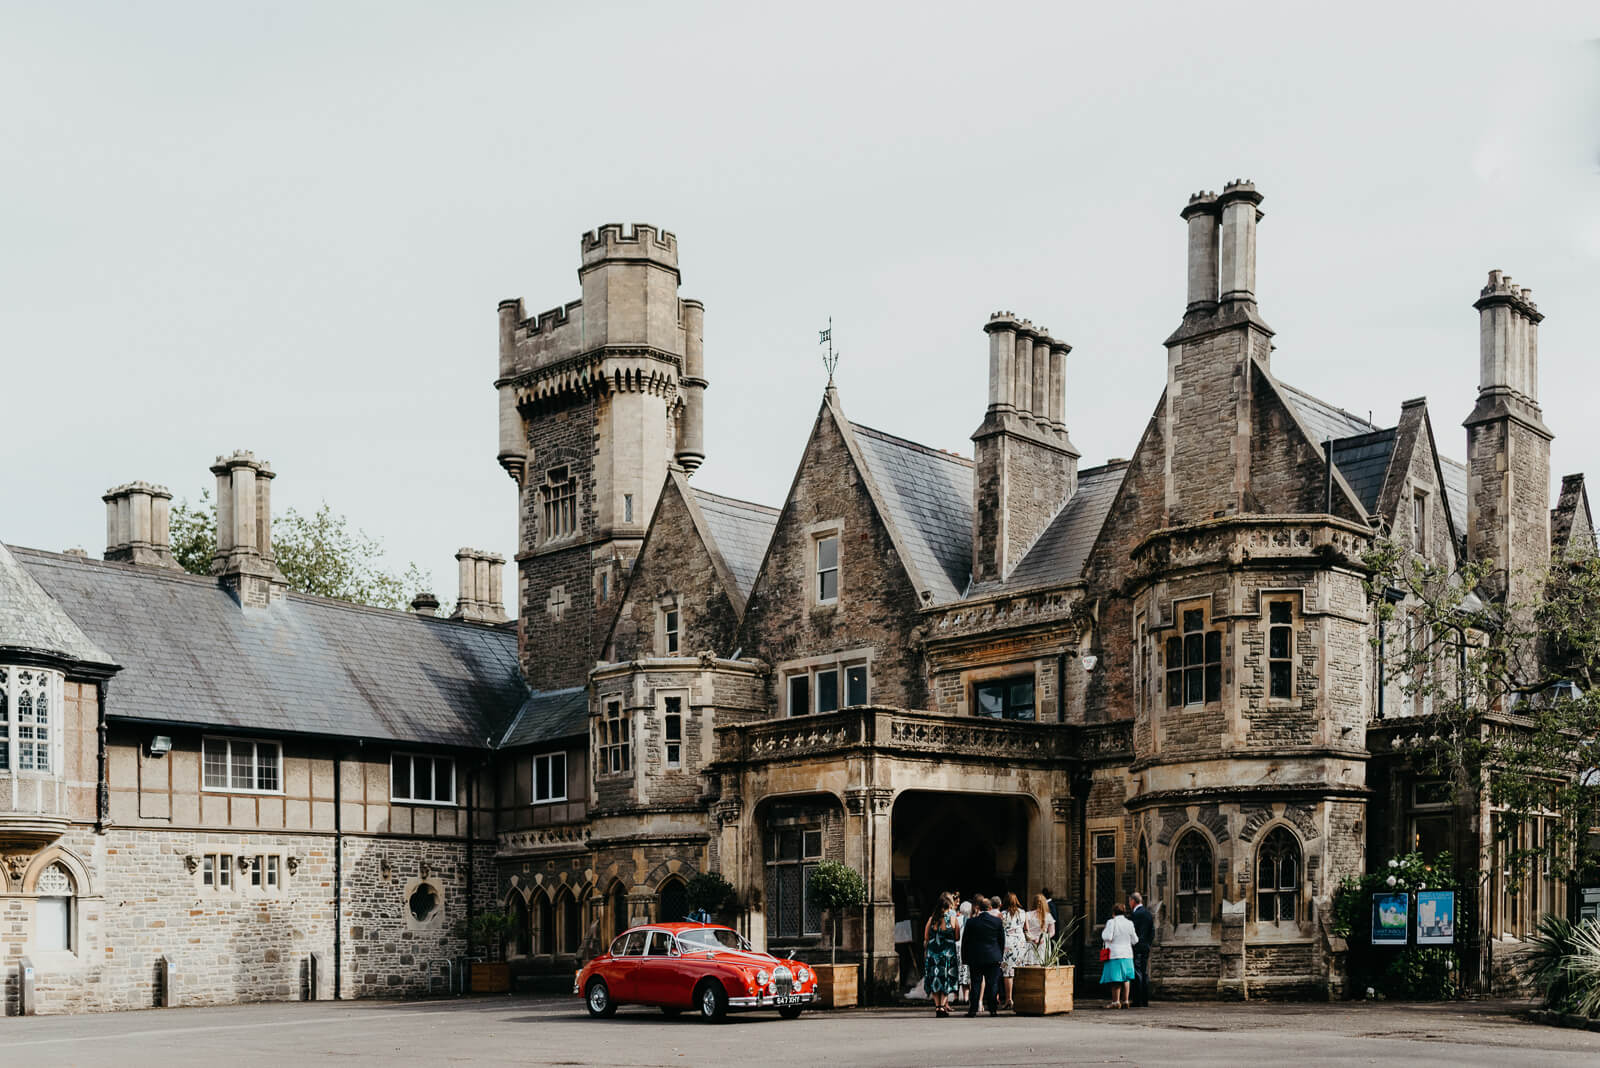 Red MKII Jaguar parked outside Insole Court Wedding